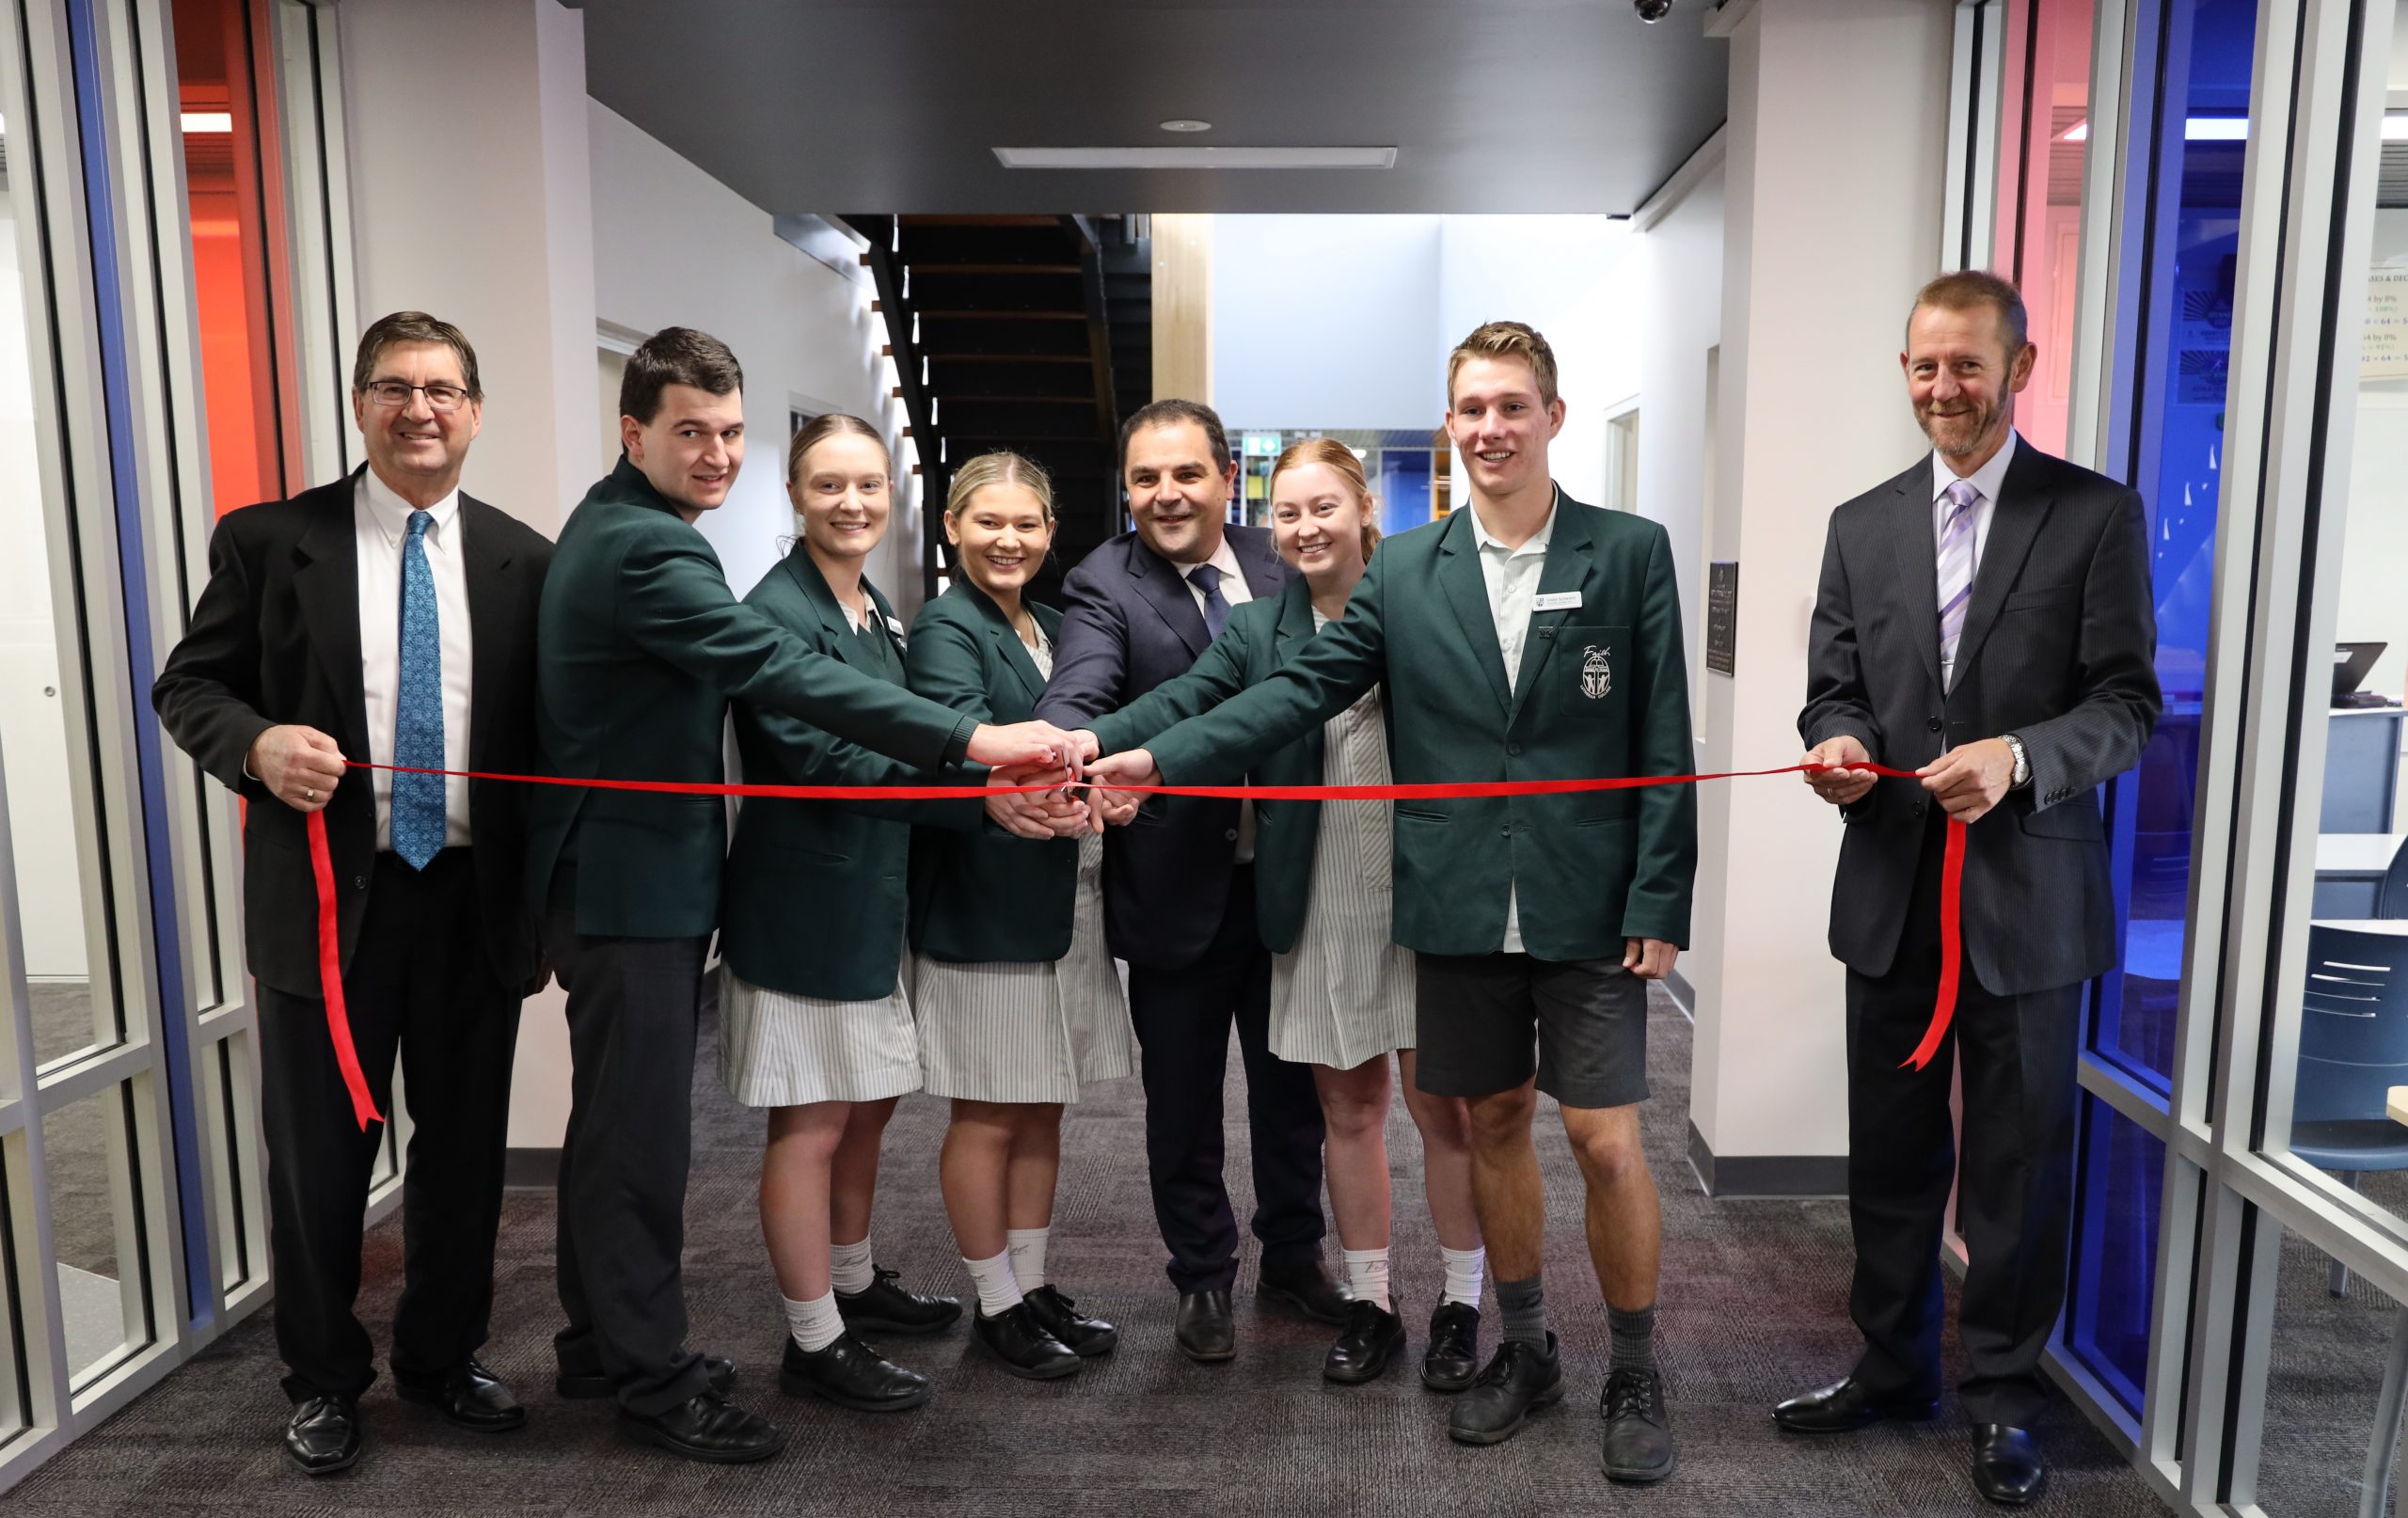 NEW FACILITIES FOR STUDENTS AT FAITH LUTHERAN COLLEGE